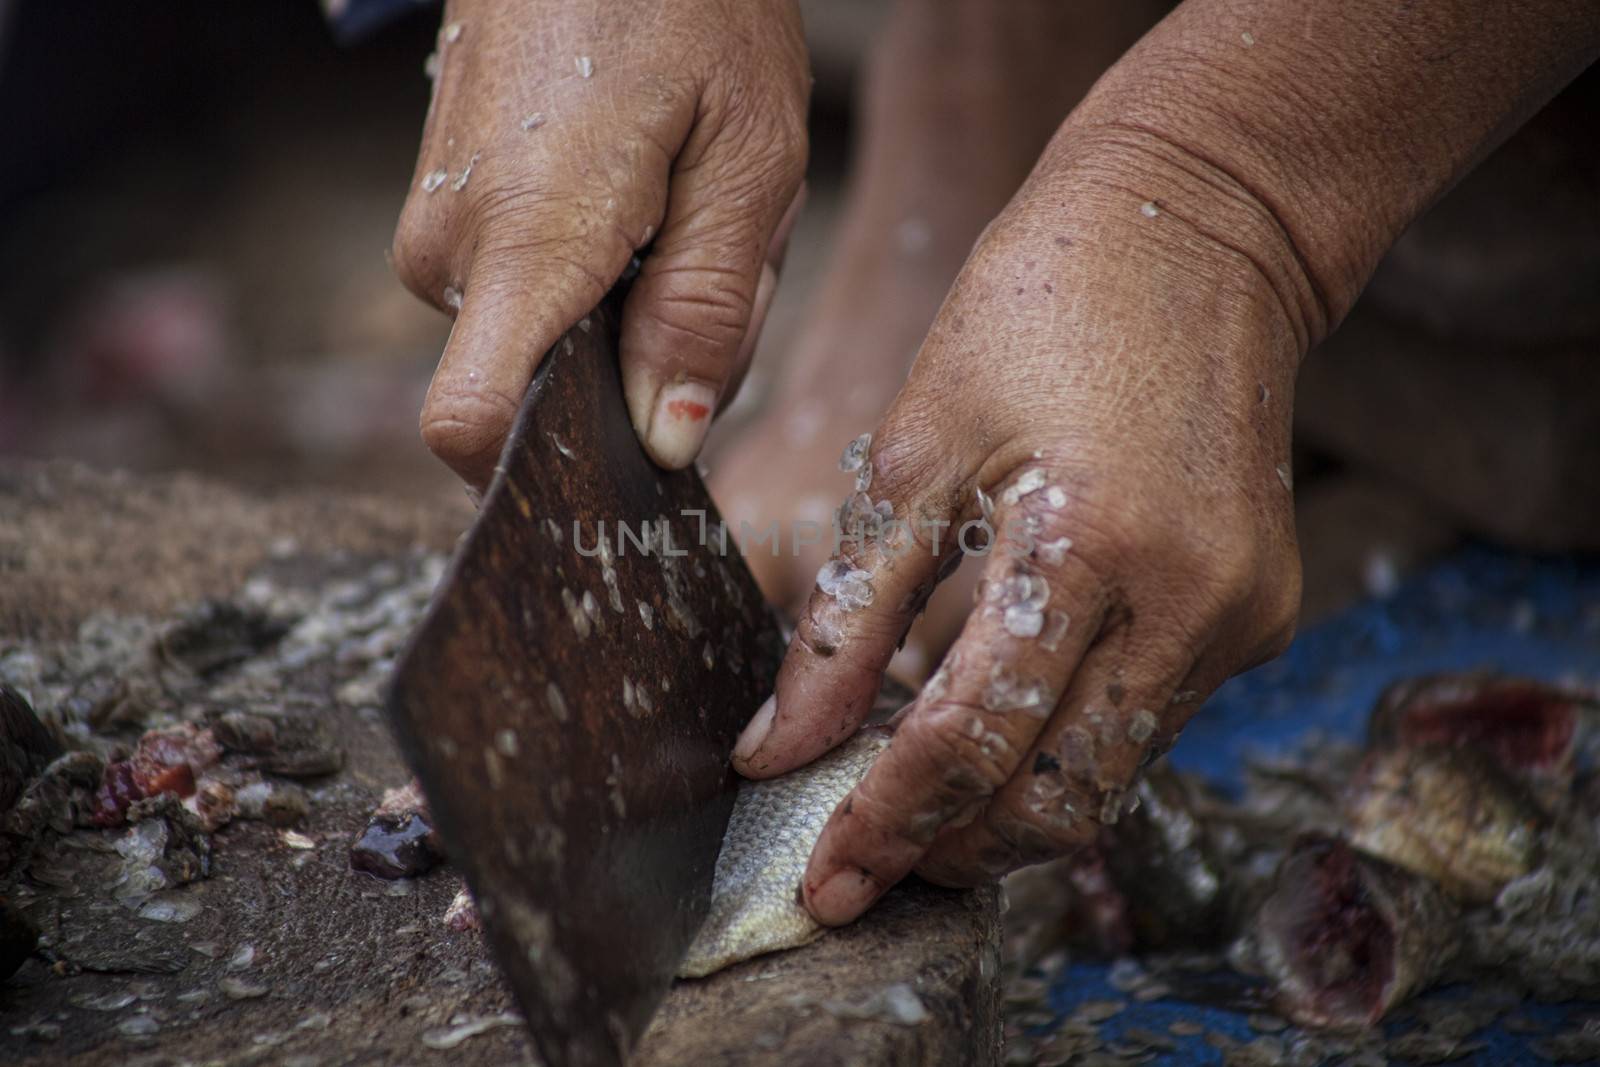 Ederly woman  cutting raw fish  in a food market in Cambodia